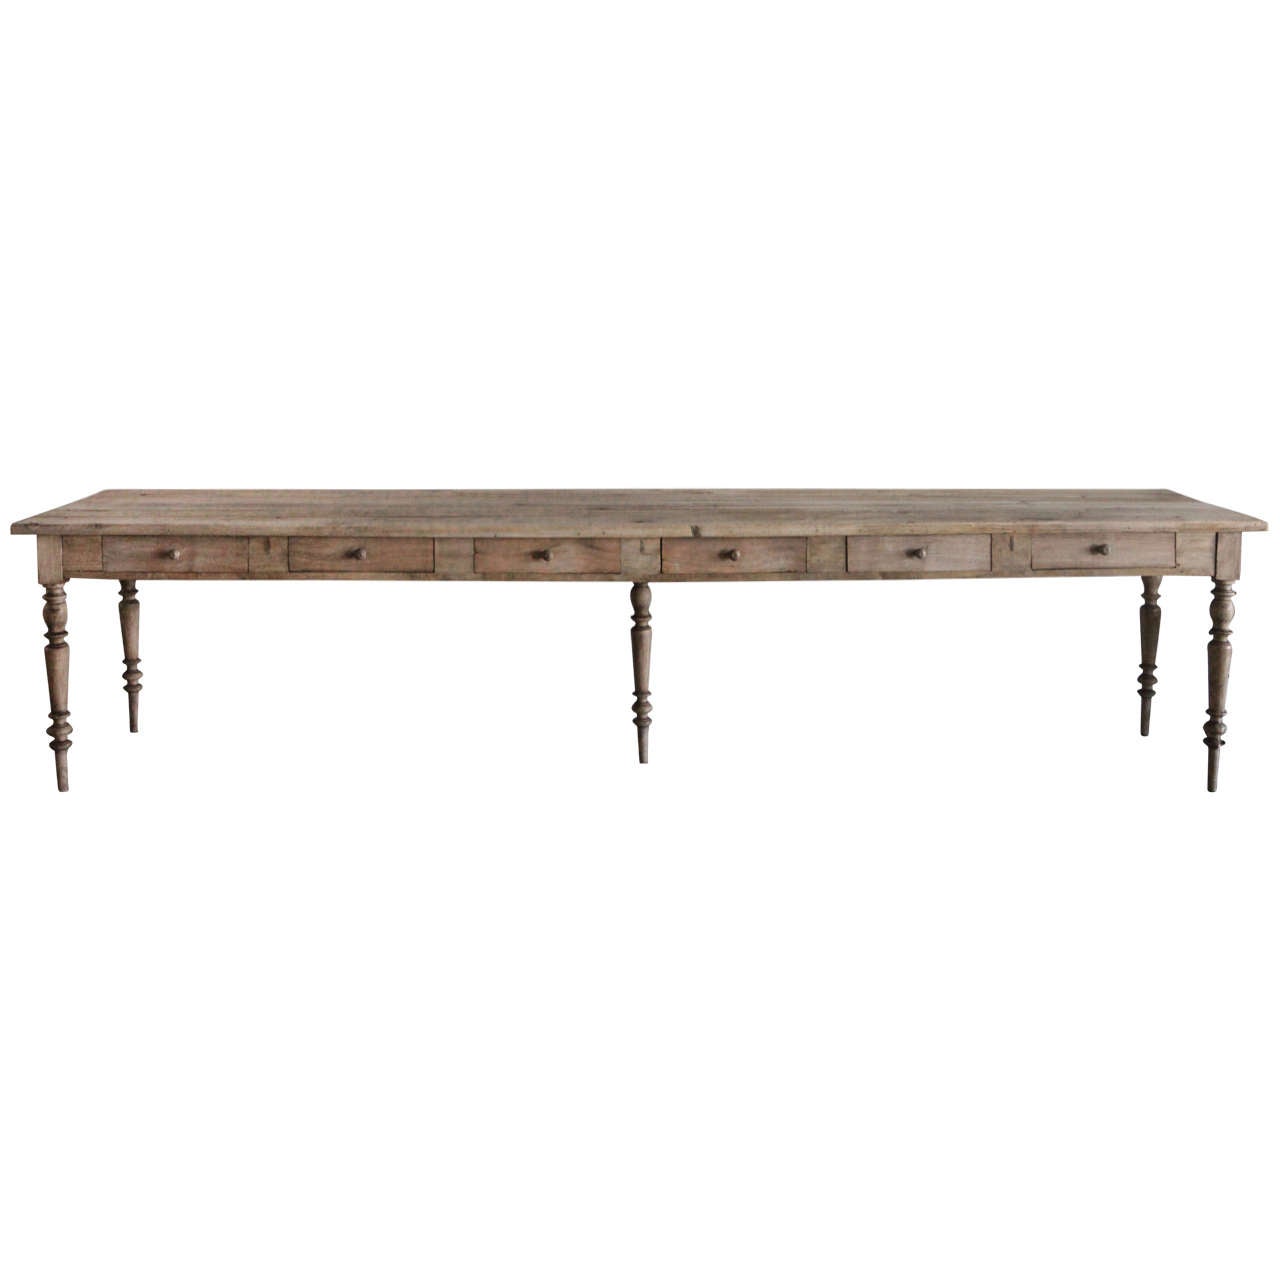 Massive French Dining Table, 19th Century